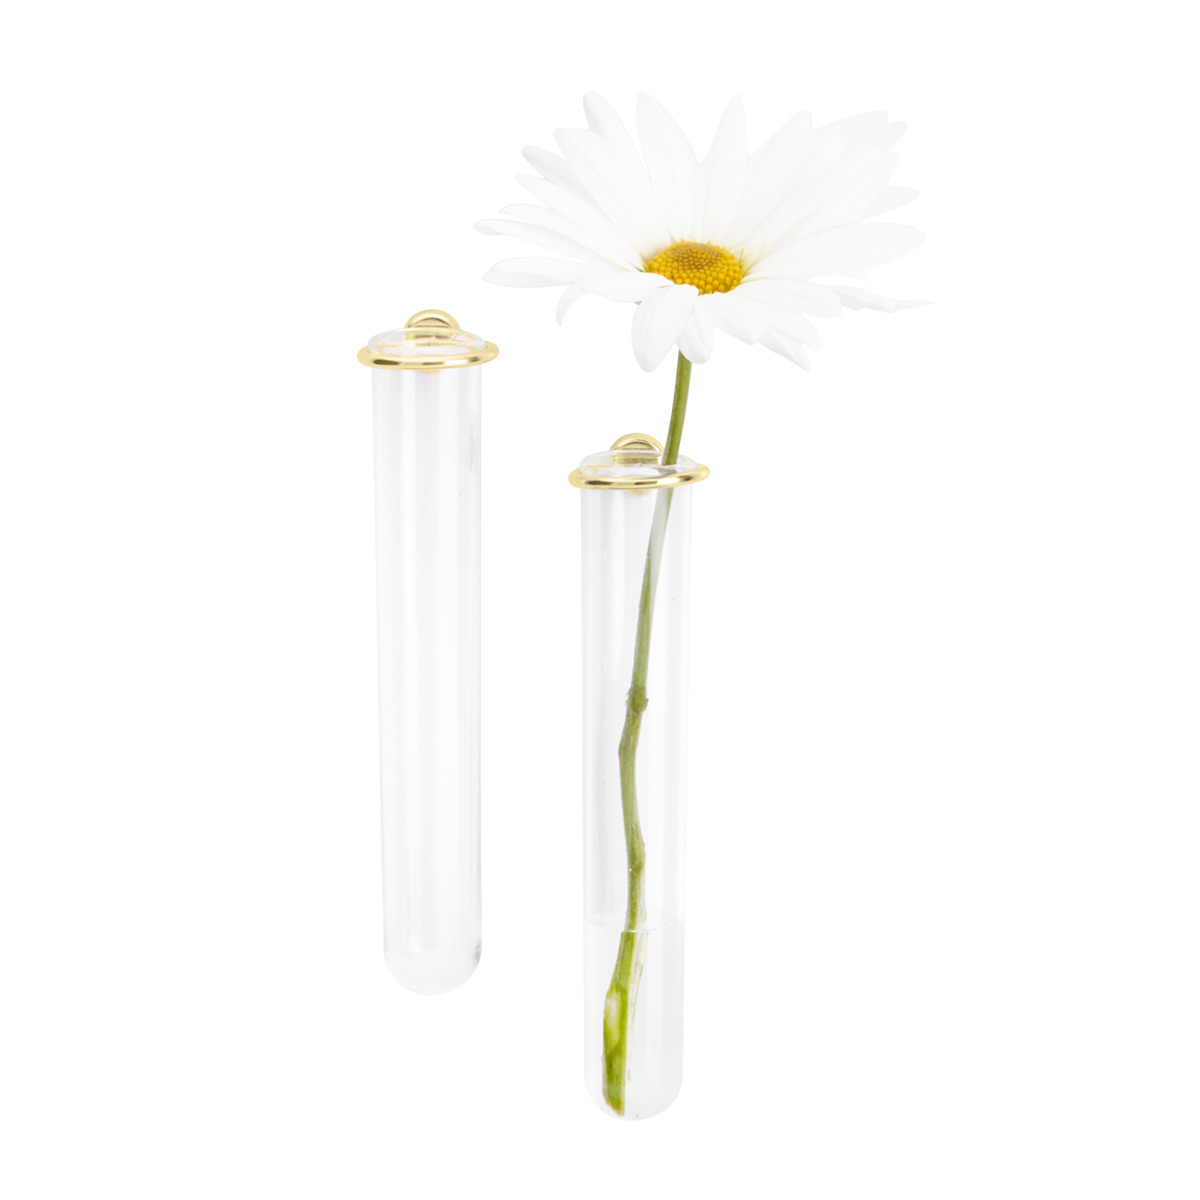 Three by Three Gold Magnetic Flower Vase | The Container Store